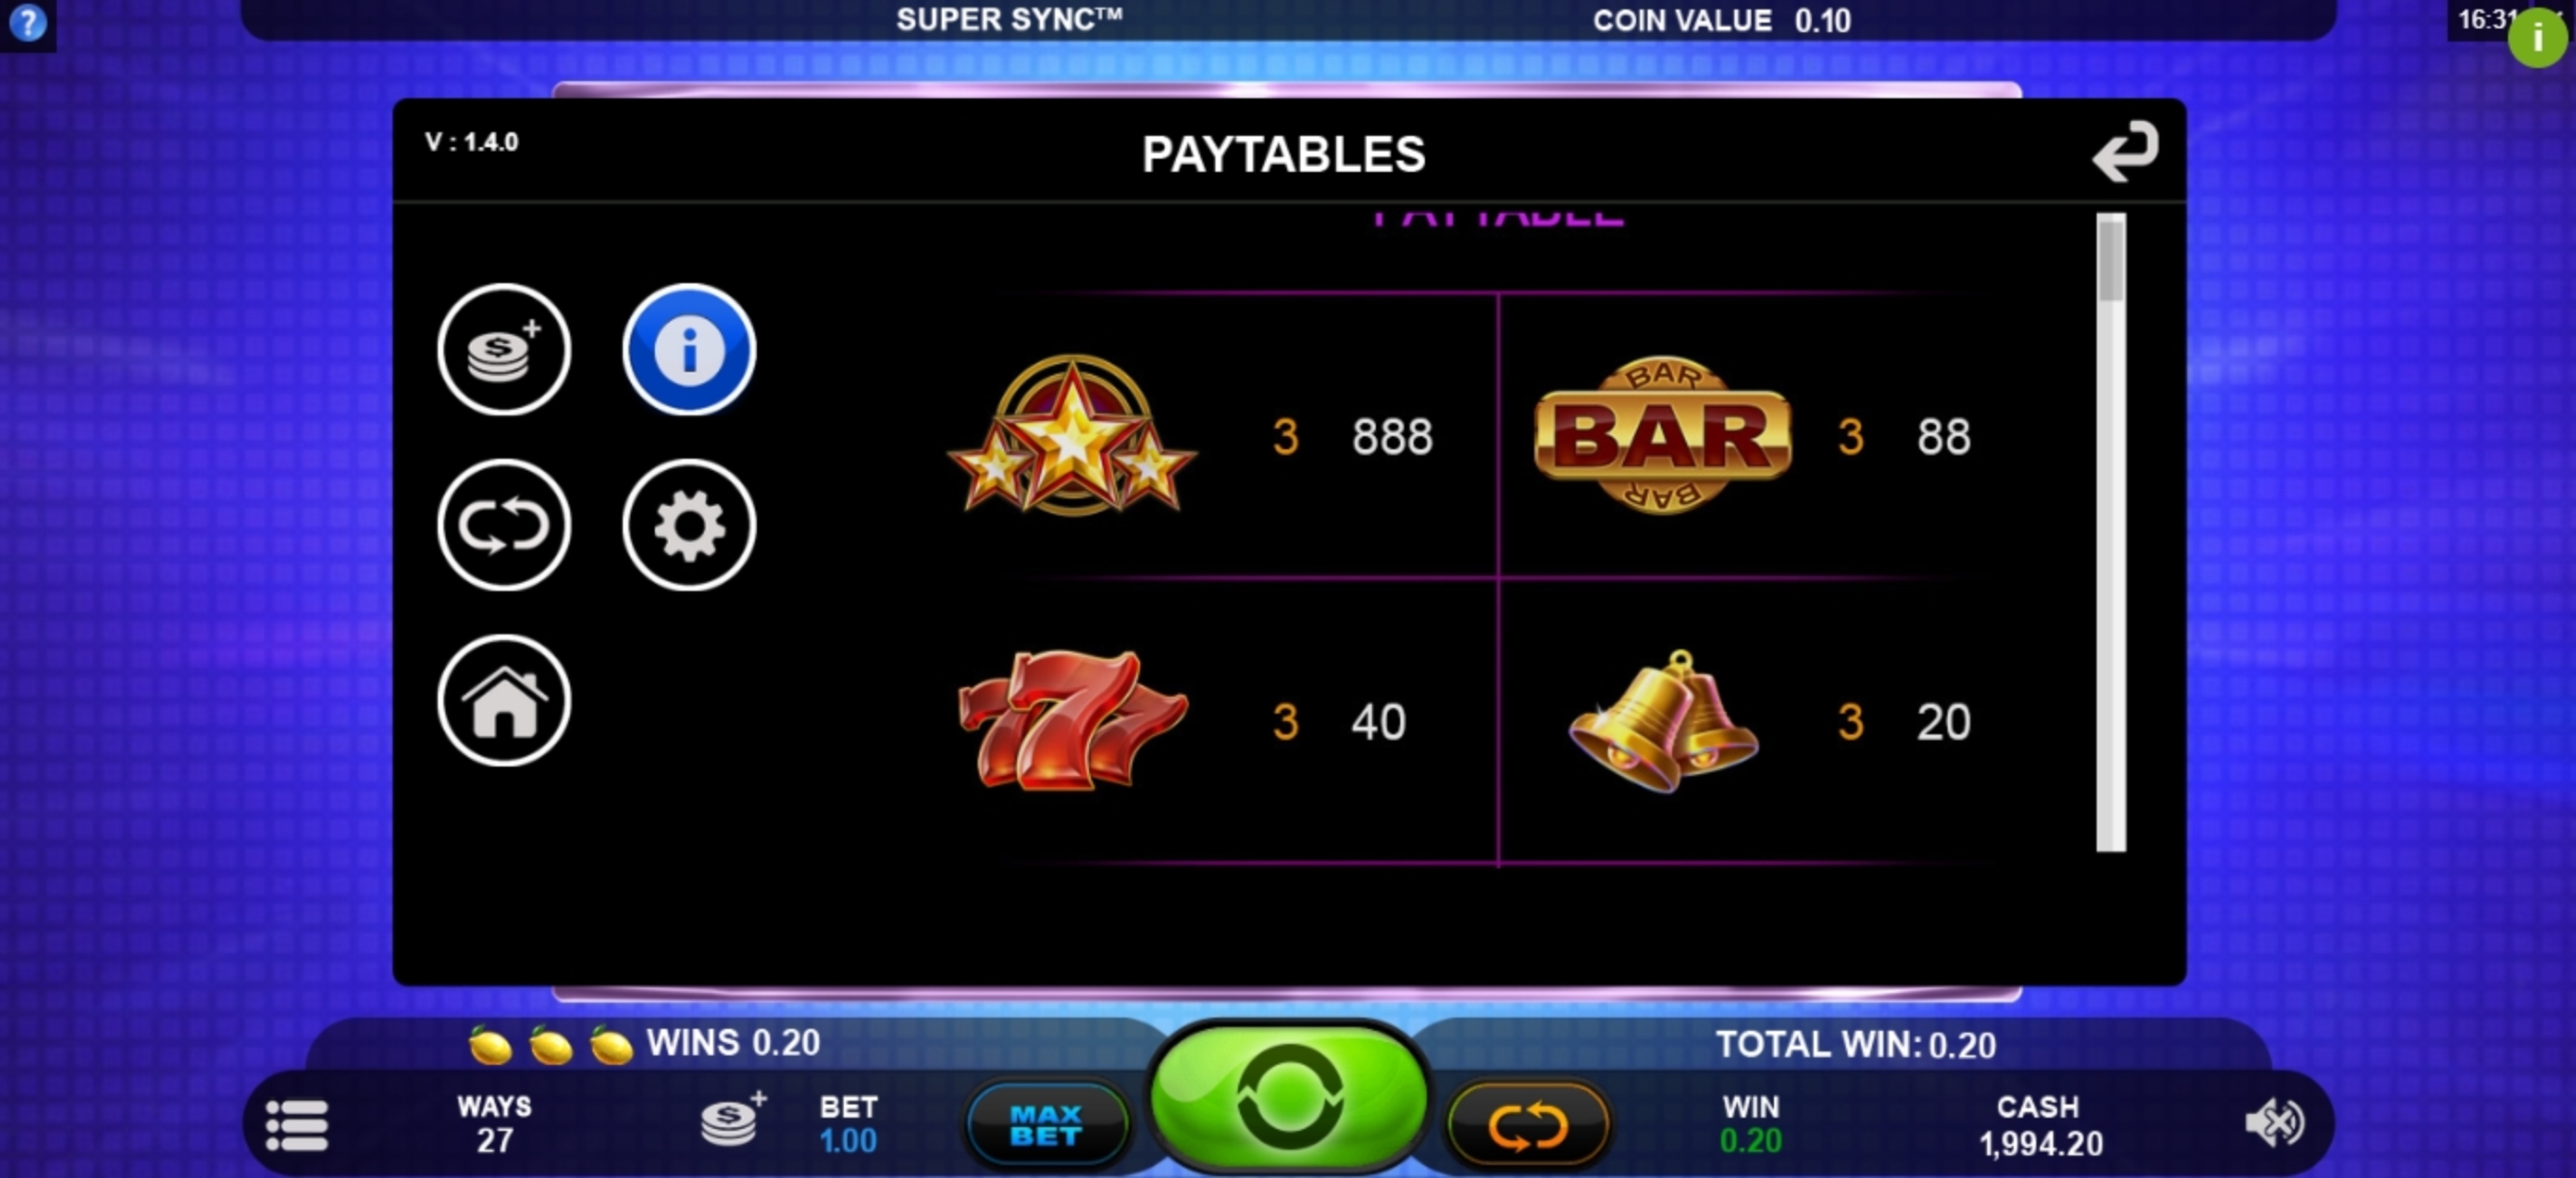 Info of Super Sync Slot Game by Plank Gaming